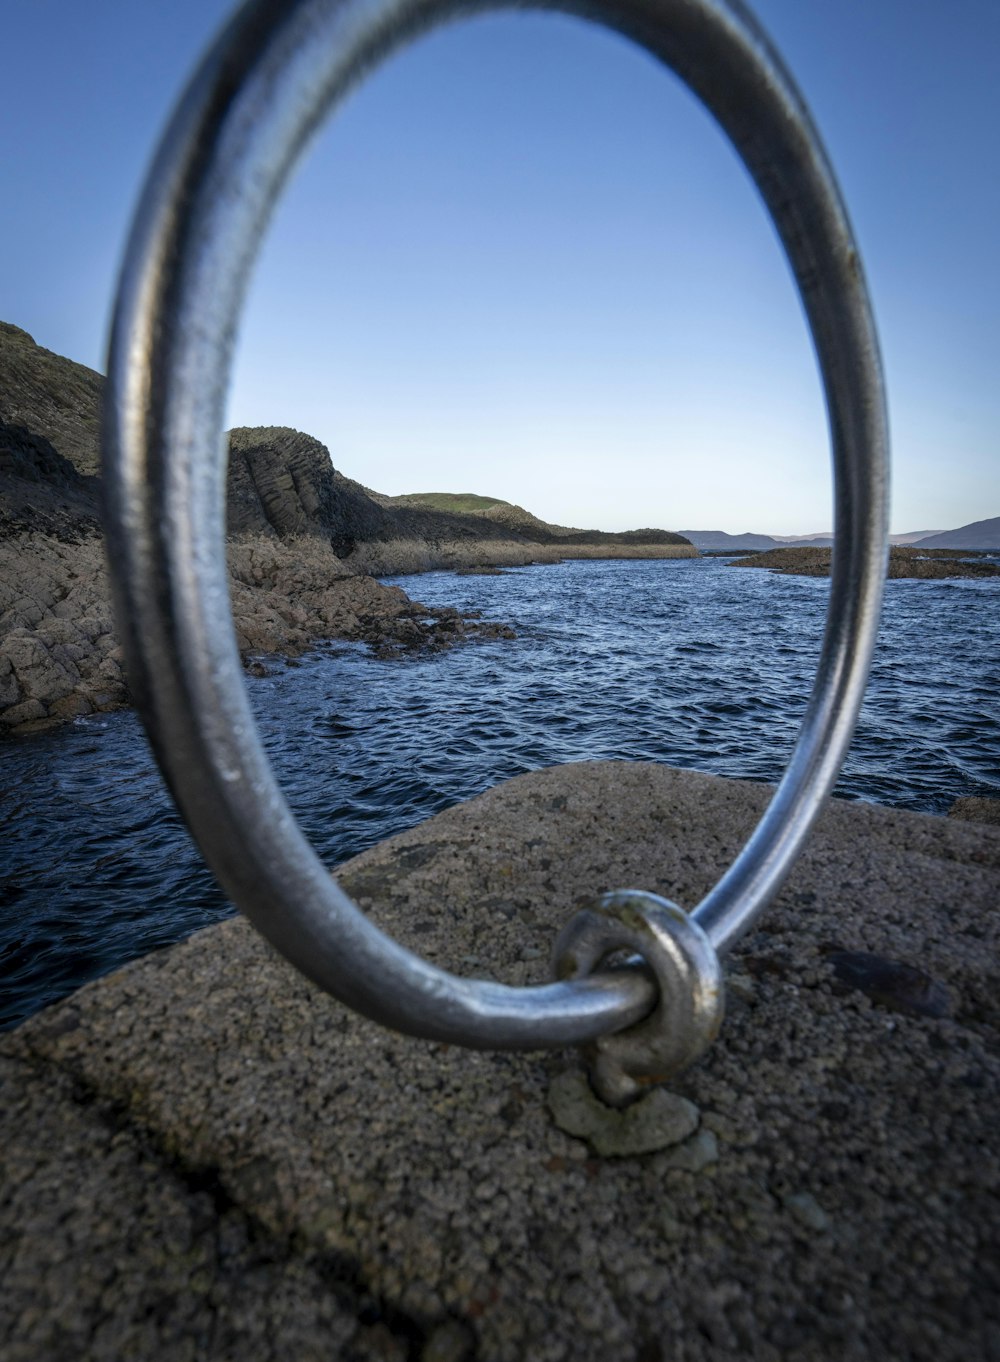 a view of a body of water through a metal ring